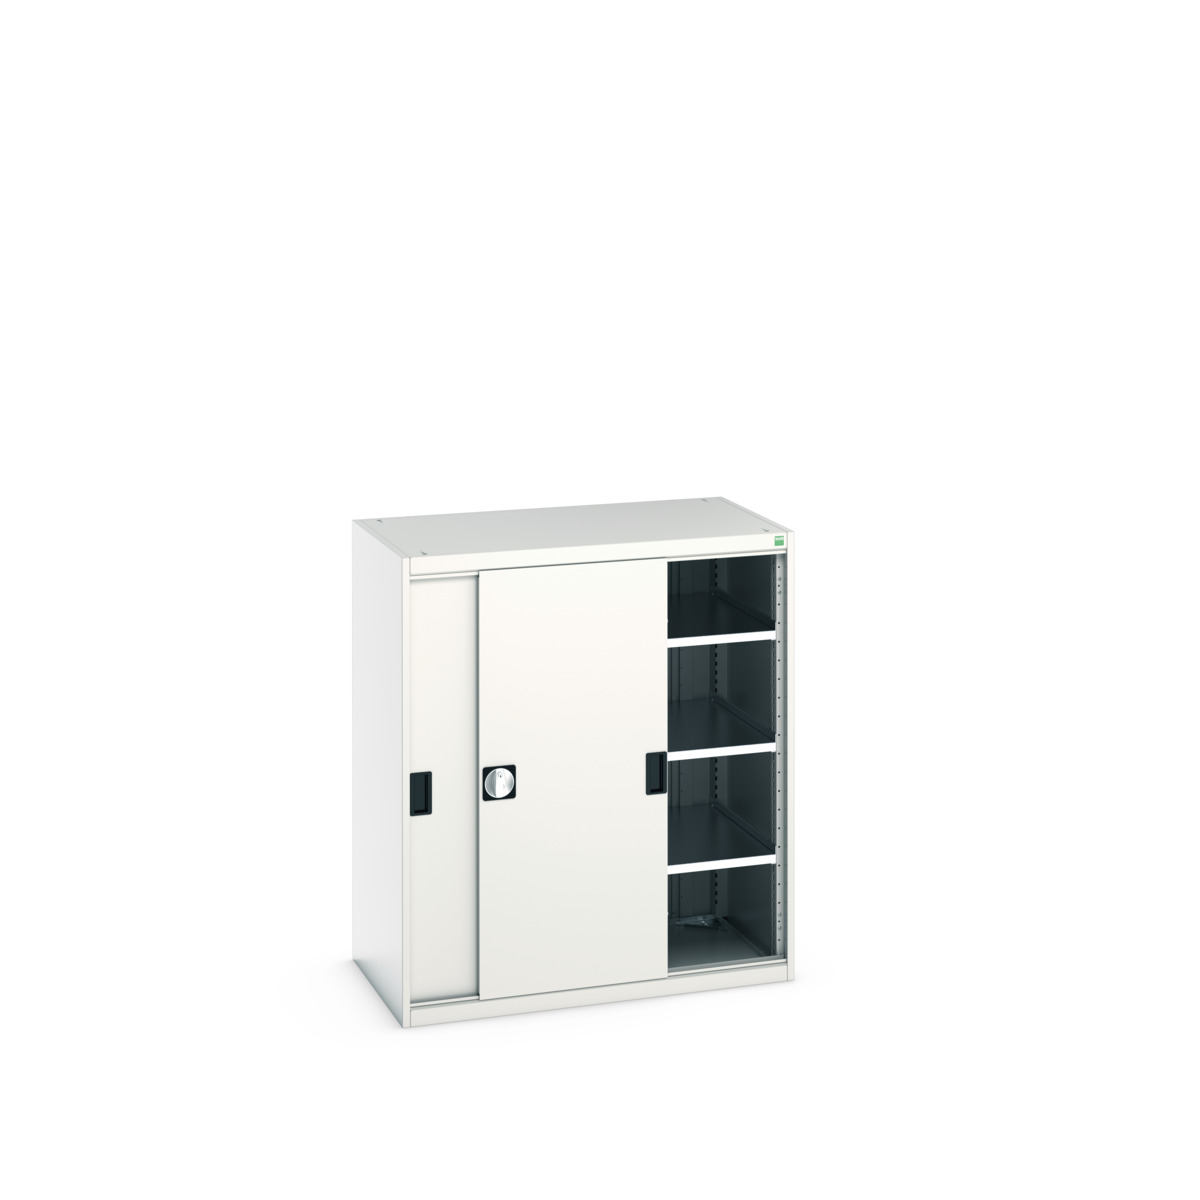 40021139.16V - Armoire Cubio SMS-10612-1